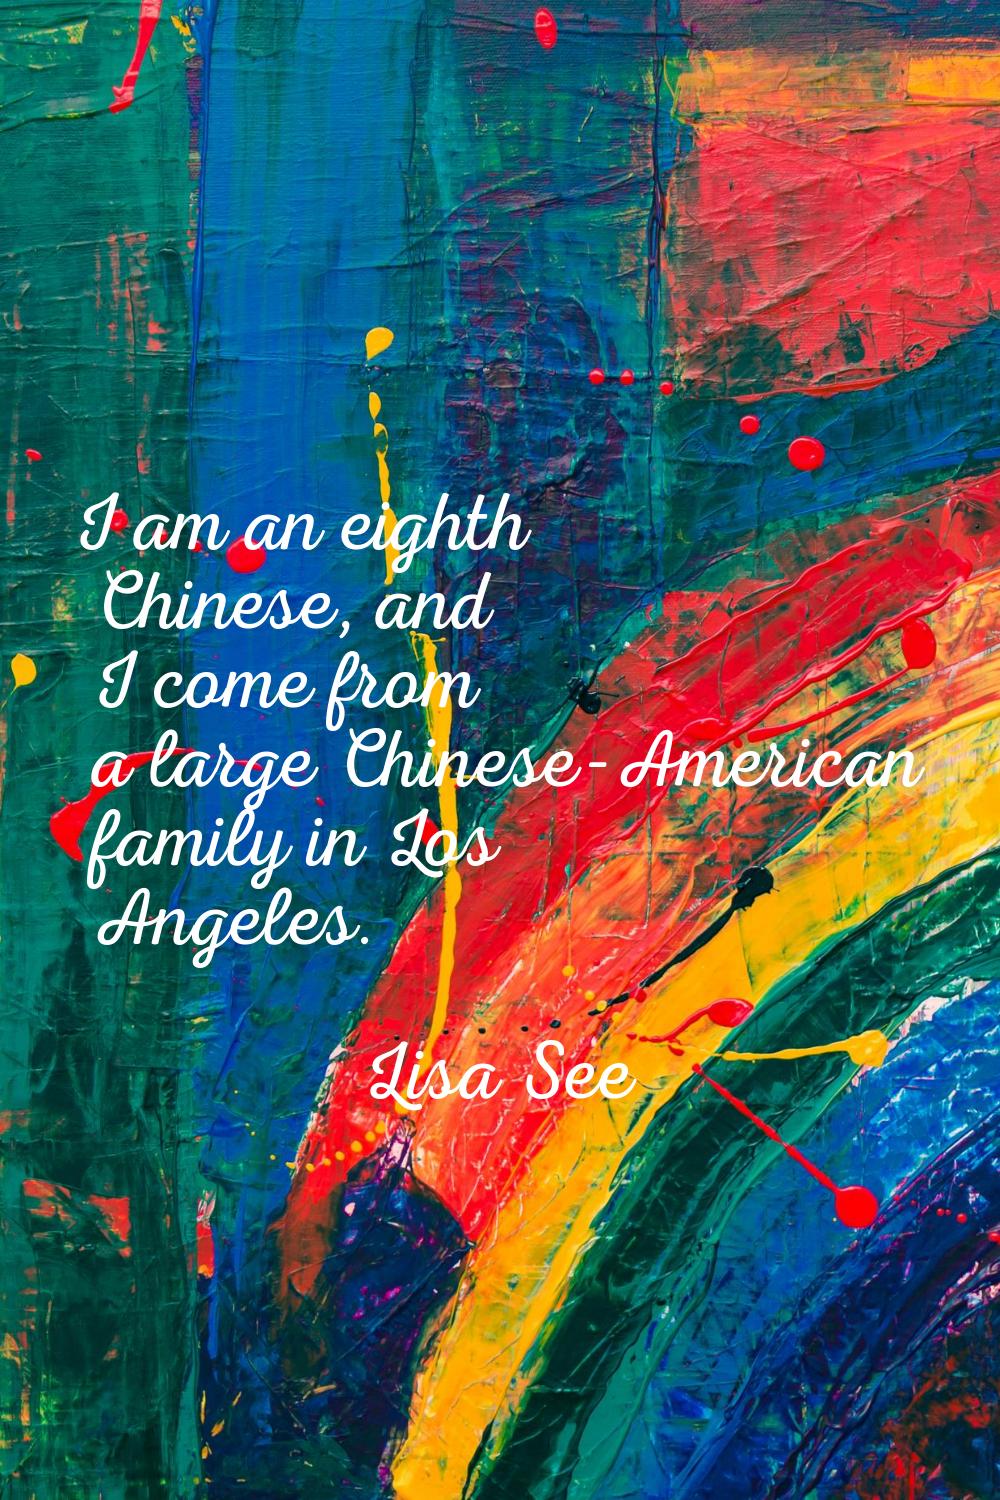 I am an eighth Chinese, and I come from a large Chinese-American family in Los Angeles.